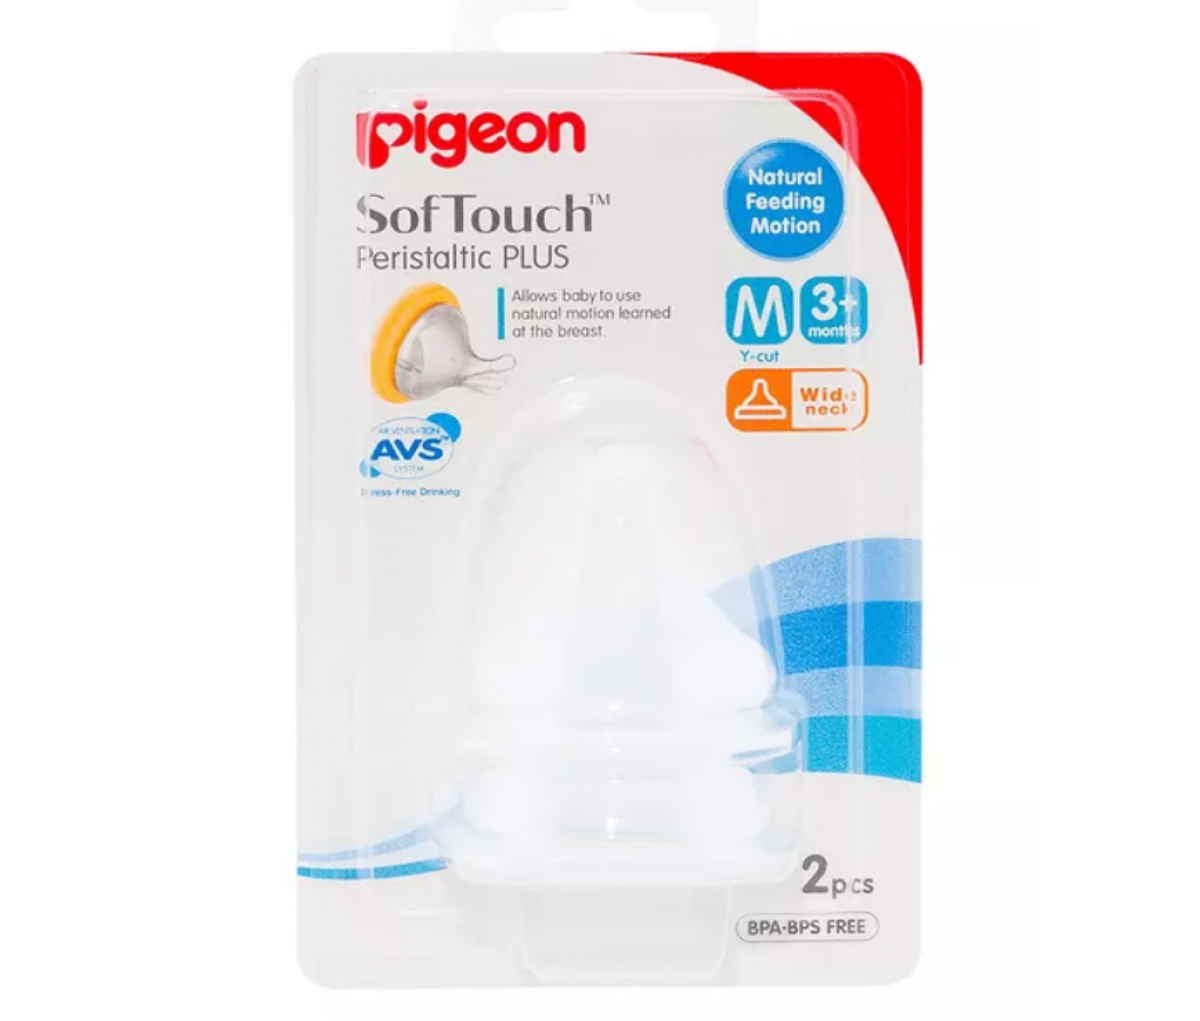 SOFTOUCH PERISTALTIC PLUS NIPPLE BLISTER PACK 2PCS (M)  [26655]